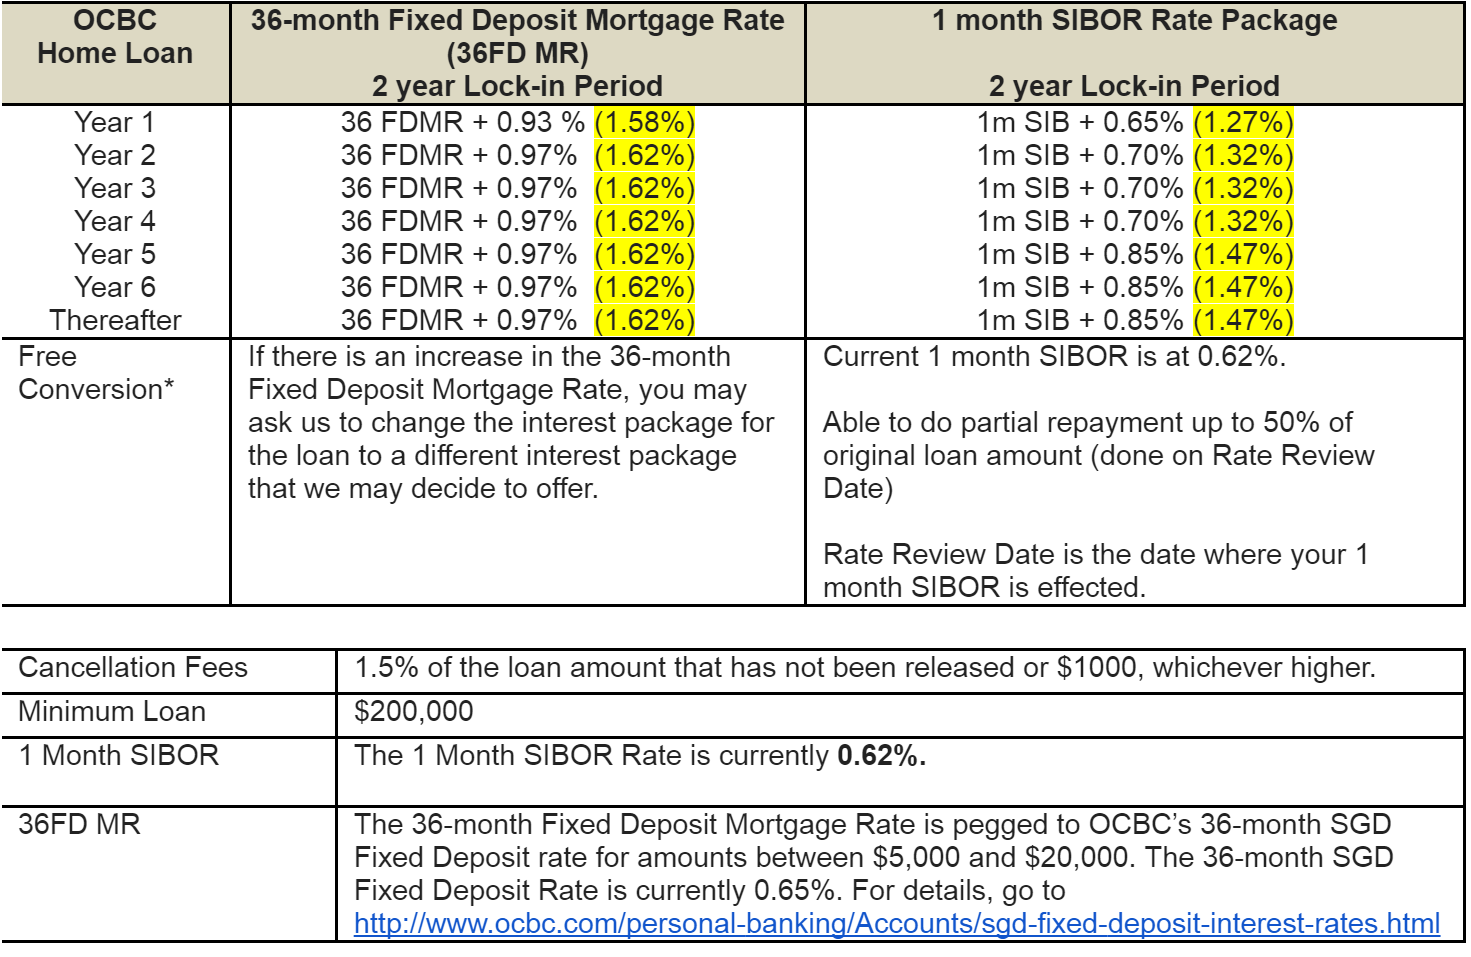 ocbc-home-loan-packages-dated-27-10-2016-propertyfactsheet